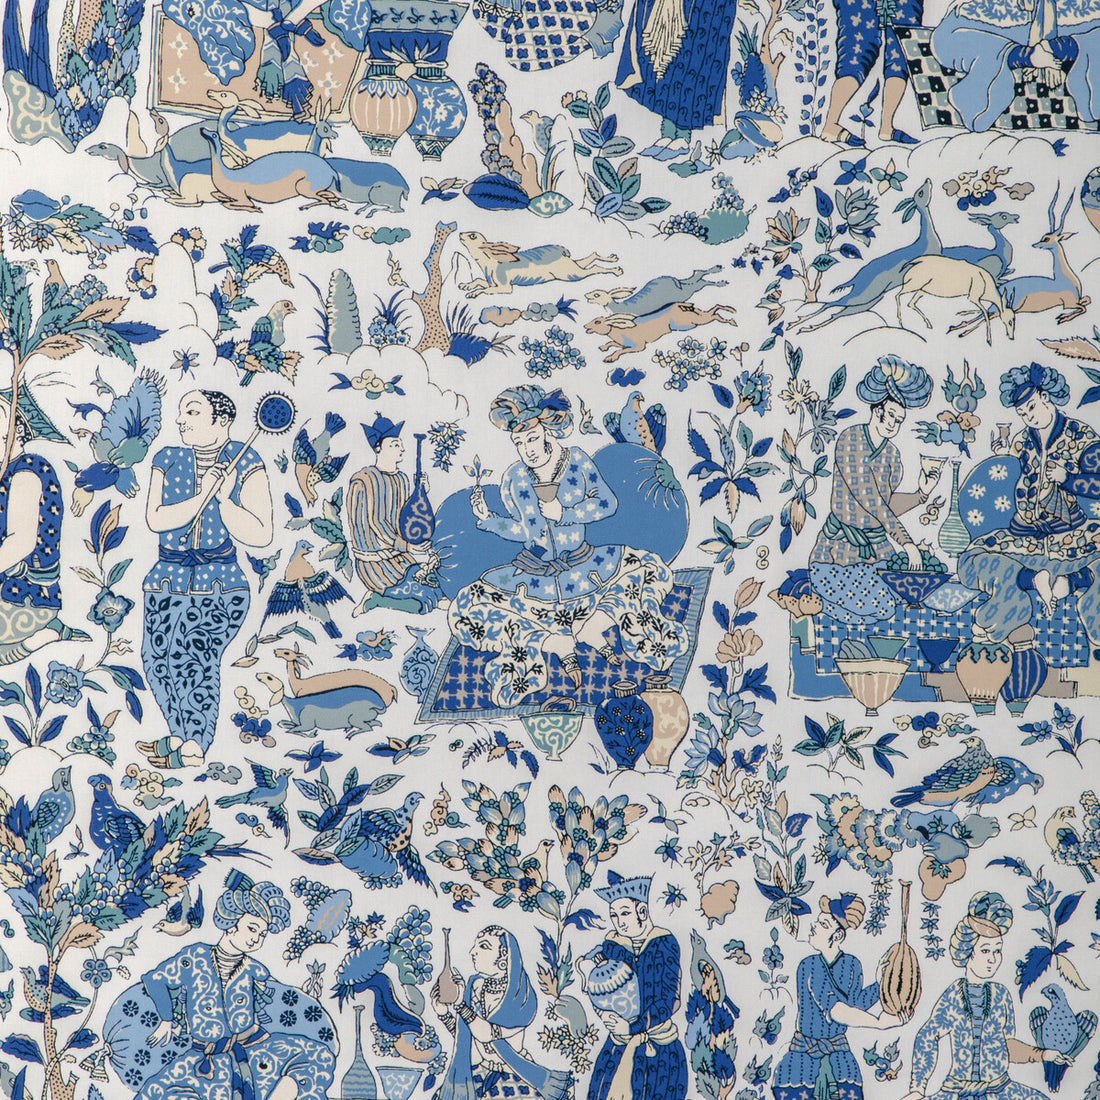 Shalimar Print fabric in blue/sand color - pattern 8024100.516.0 - by Brunschwig &amp; Fils in the La Menagerie collection